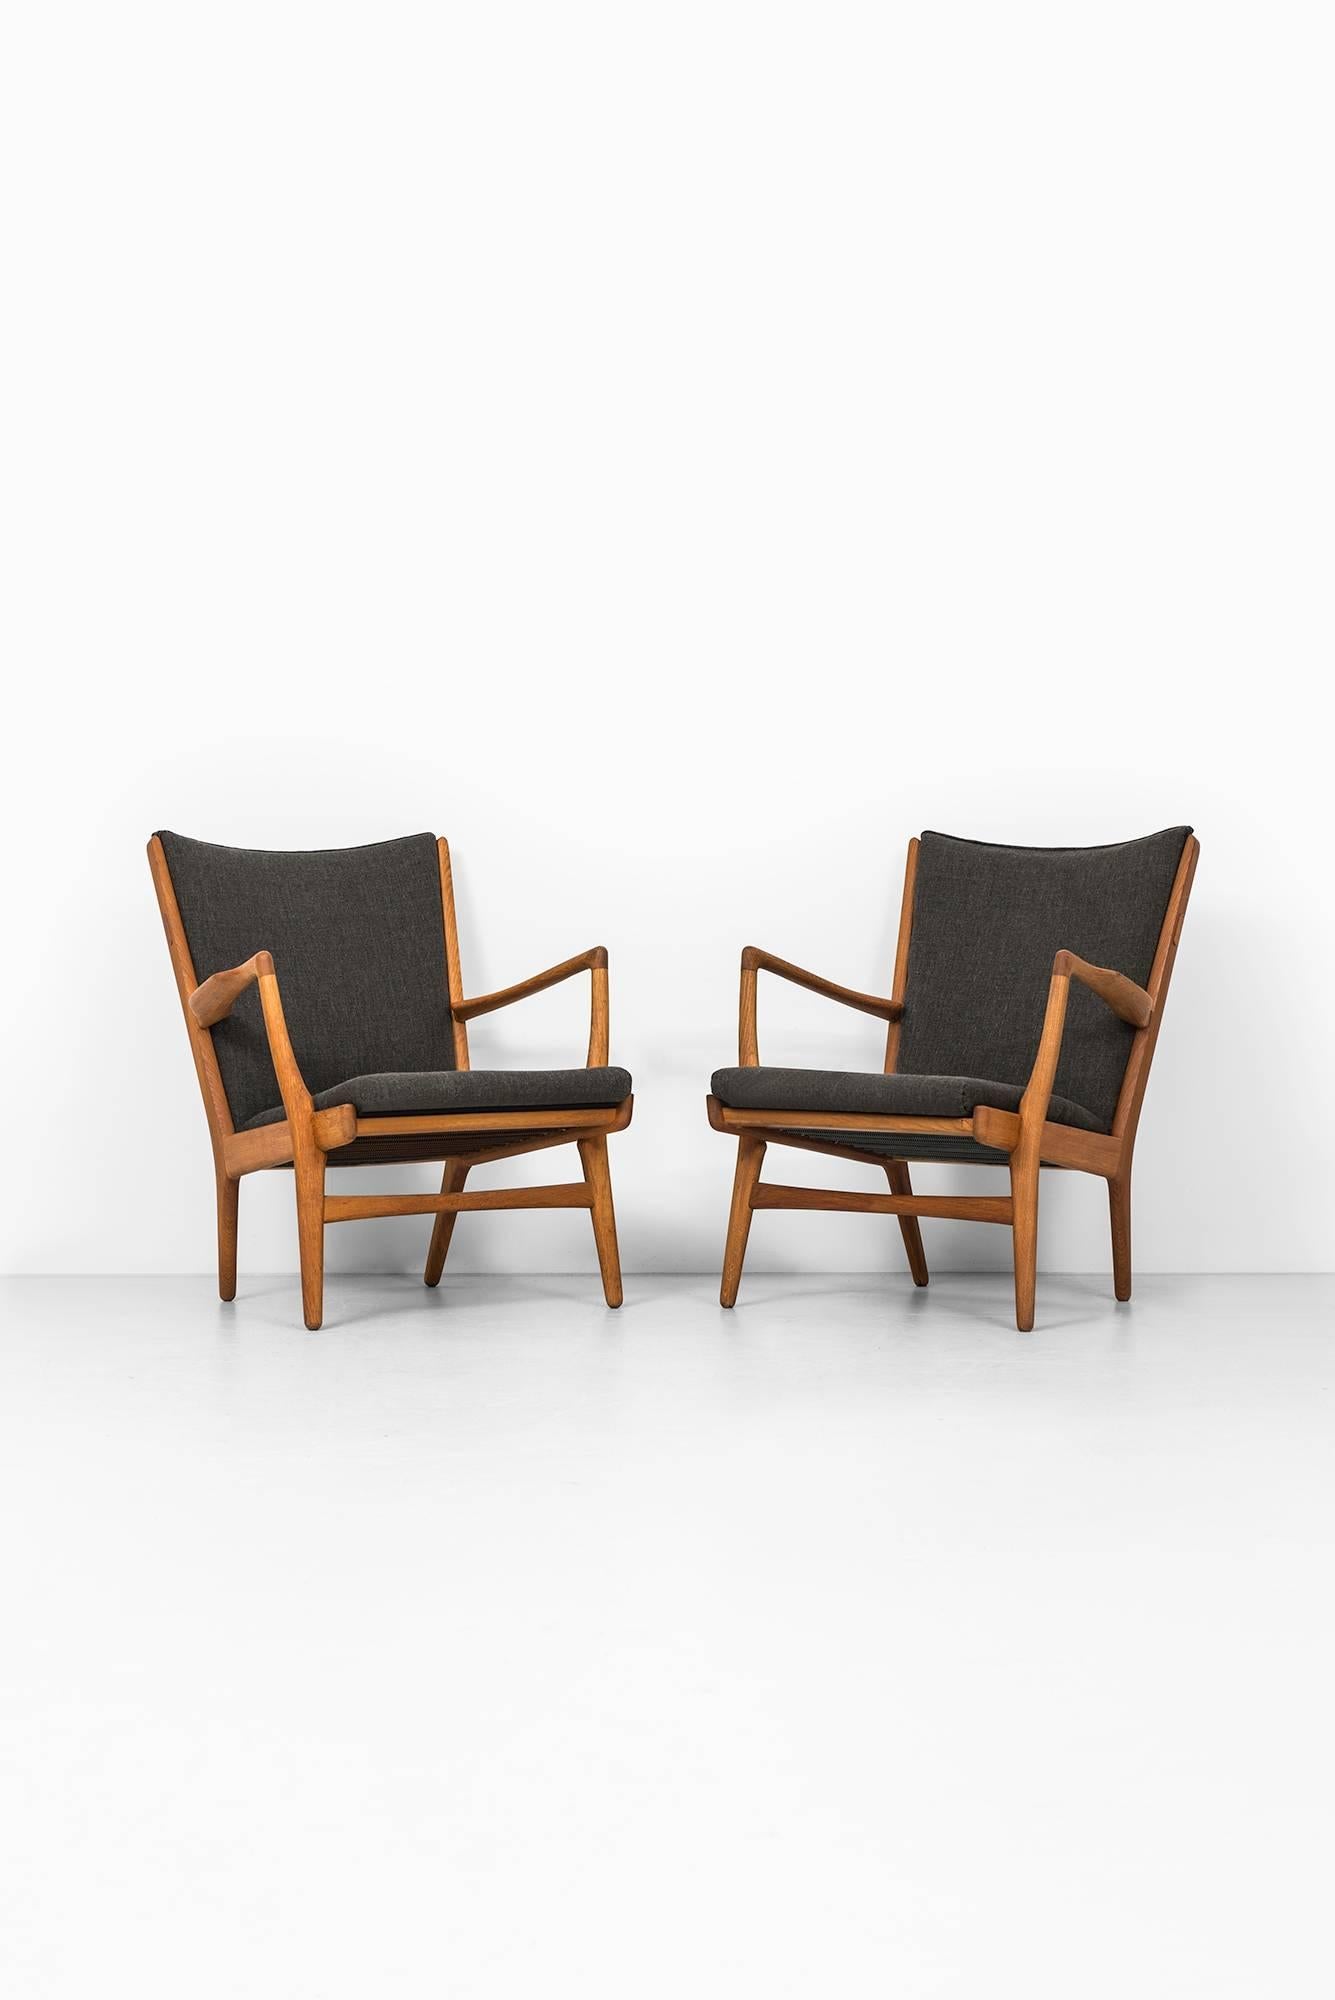 Rare pair of easy chairs model AP-16 designed by Hans Wegner. Produced by AP-Stolen in Denmark.